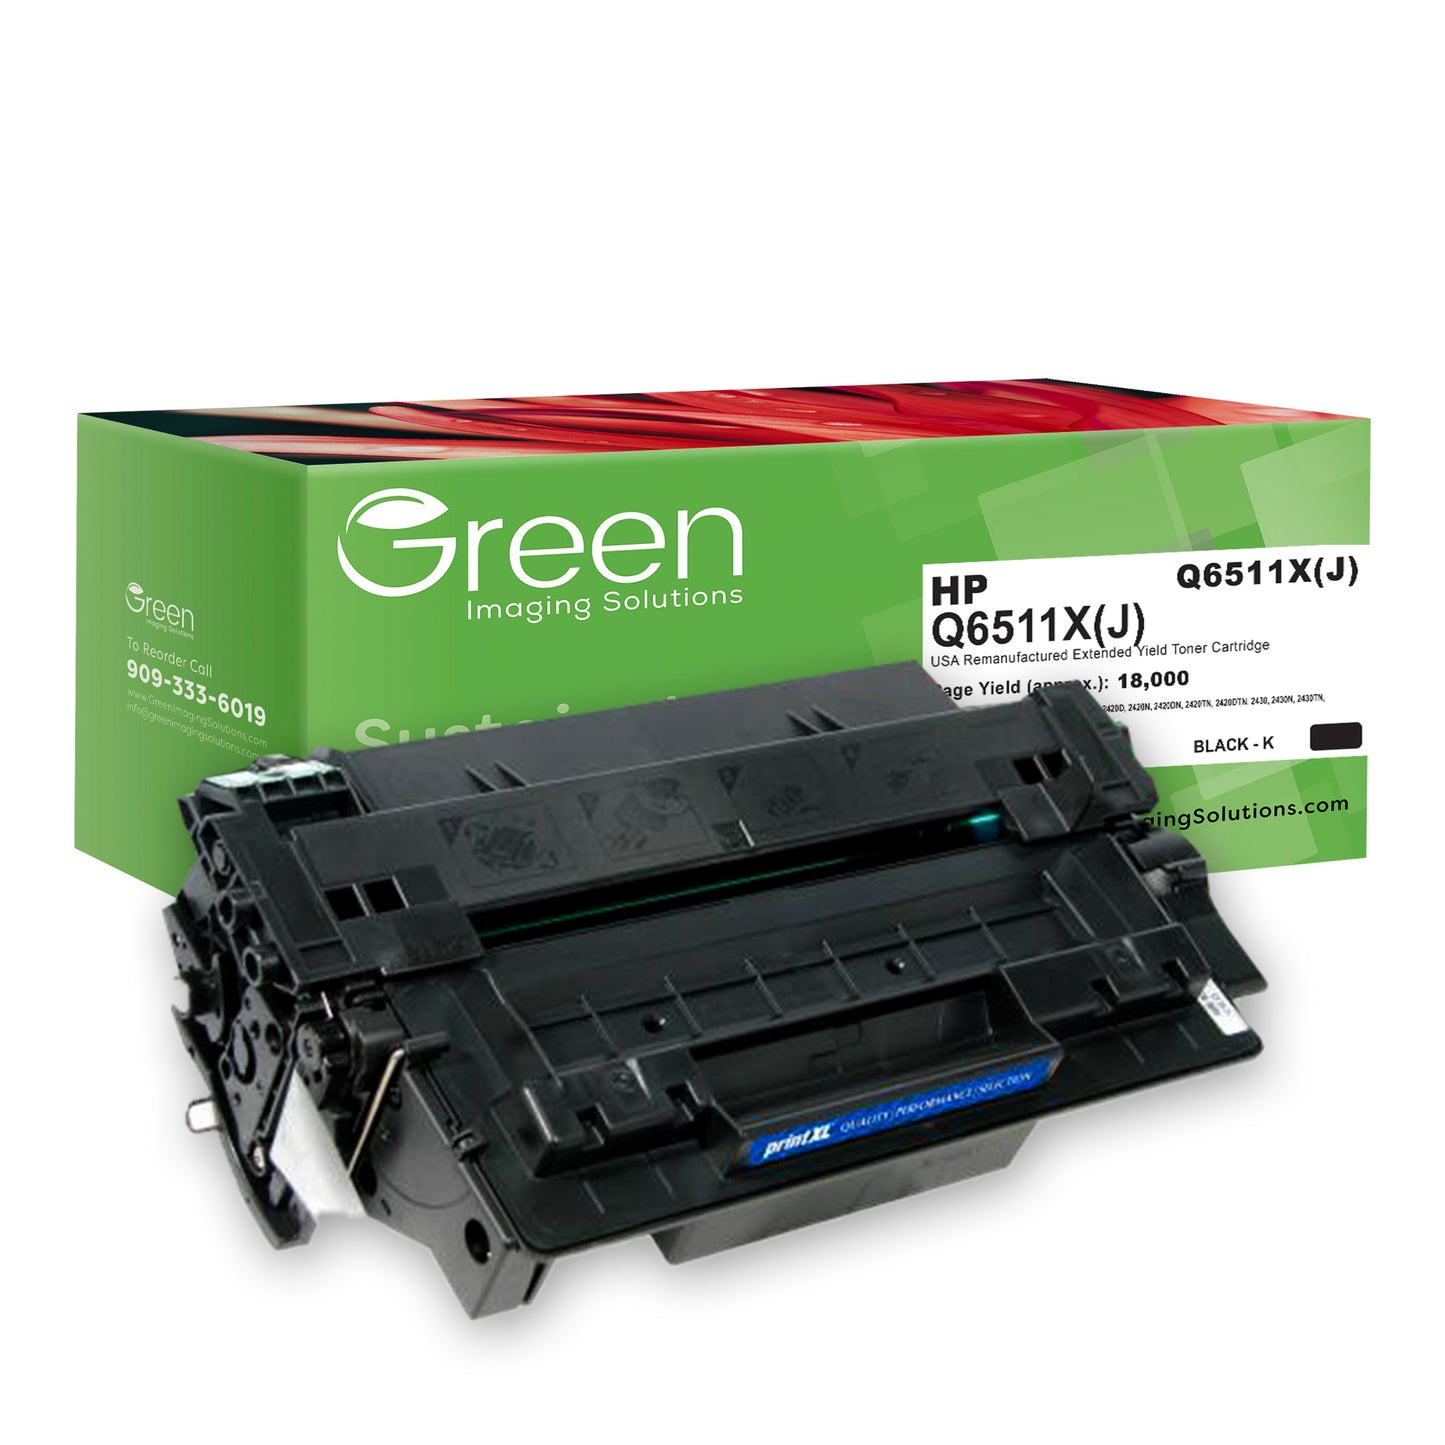 GIS USA Remanufactured Extended Yield Toner Cartridge for HP Q6511X